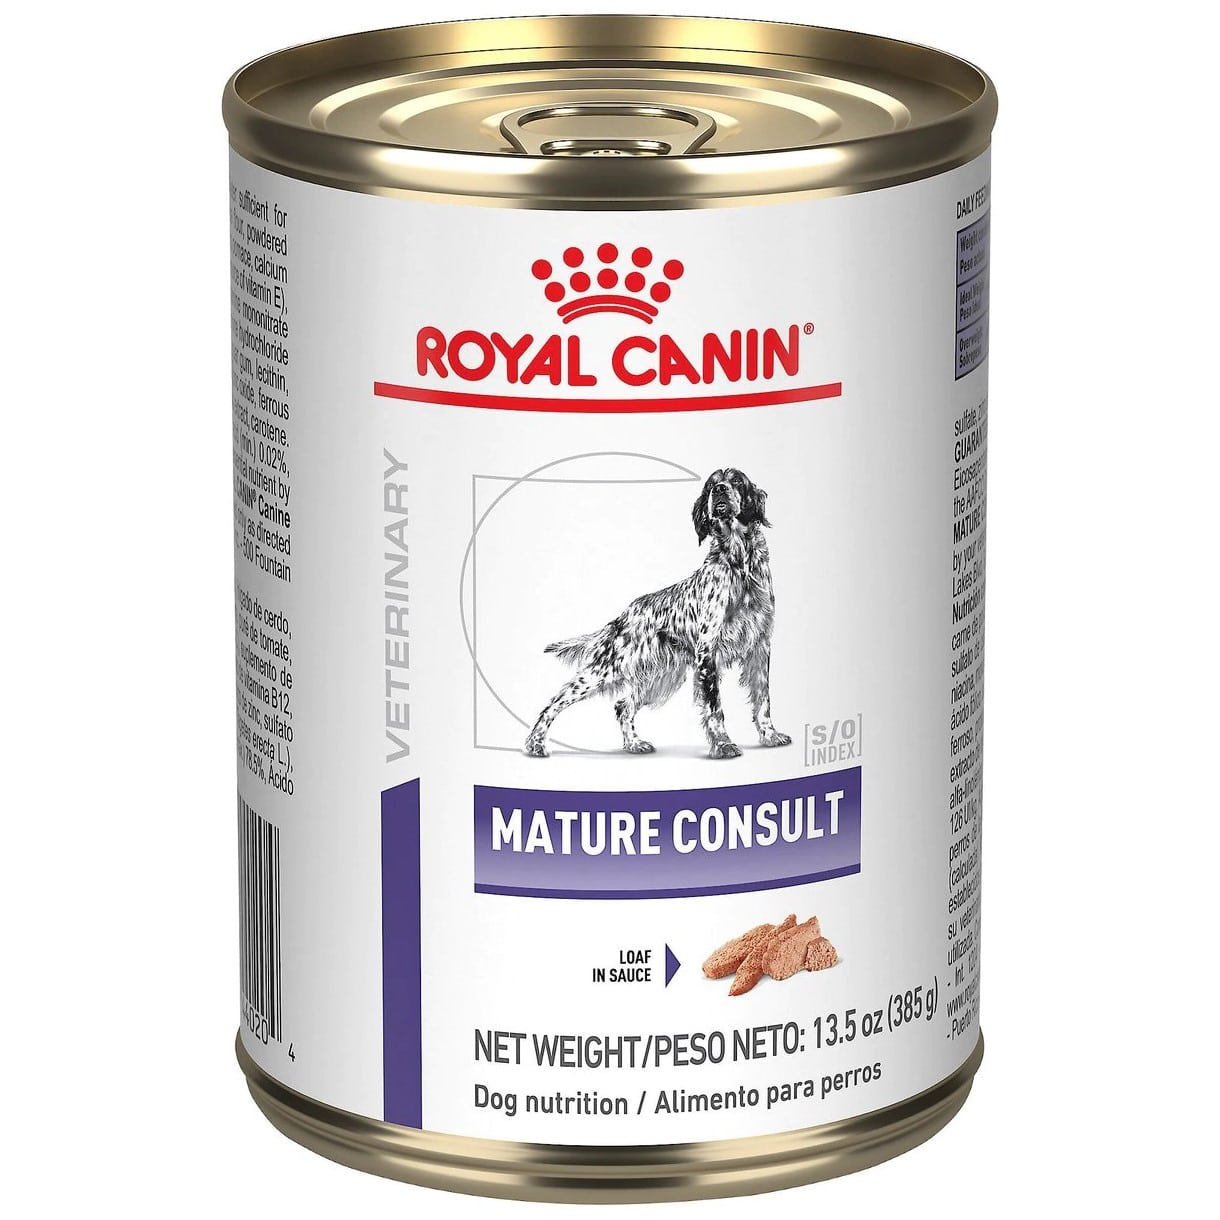 Royal Canin Veterinary Diet Adult Mature Consult Loaf in Sauce Canned Dog Food